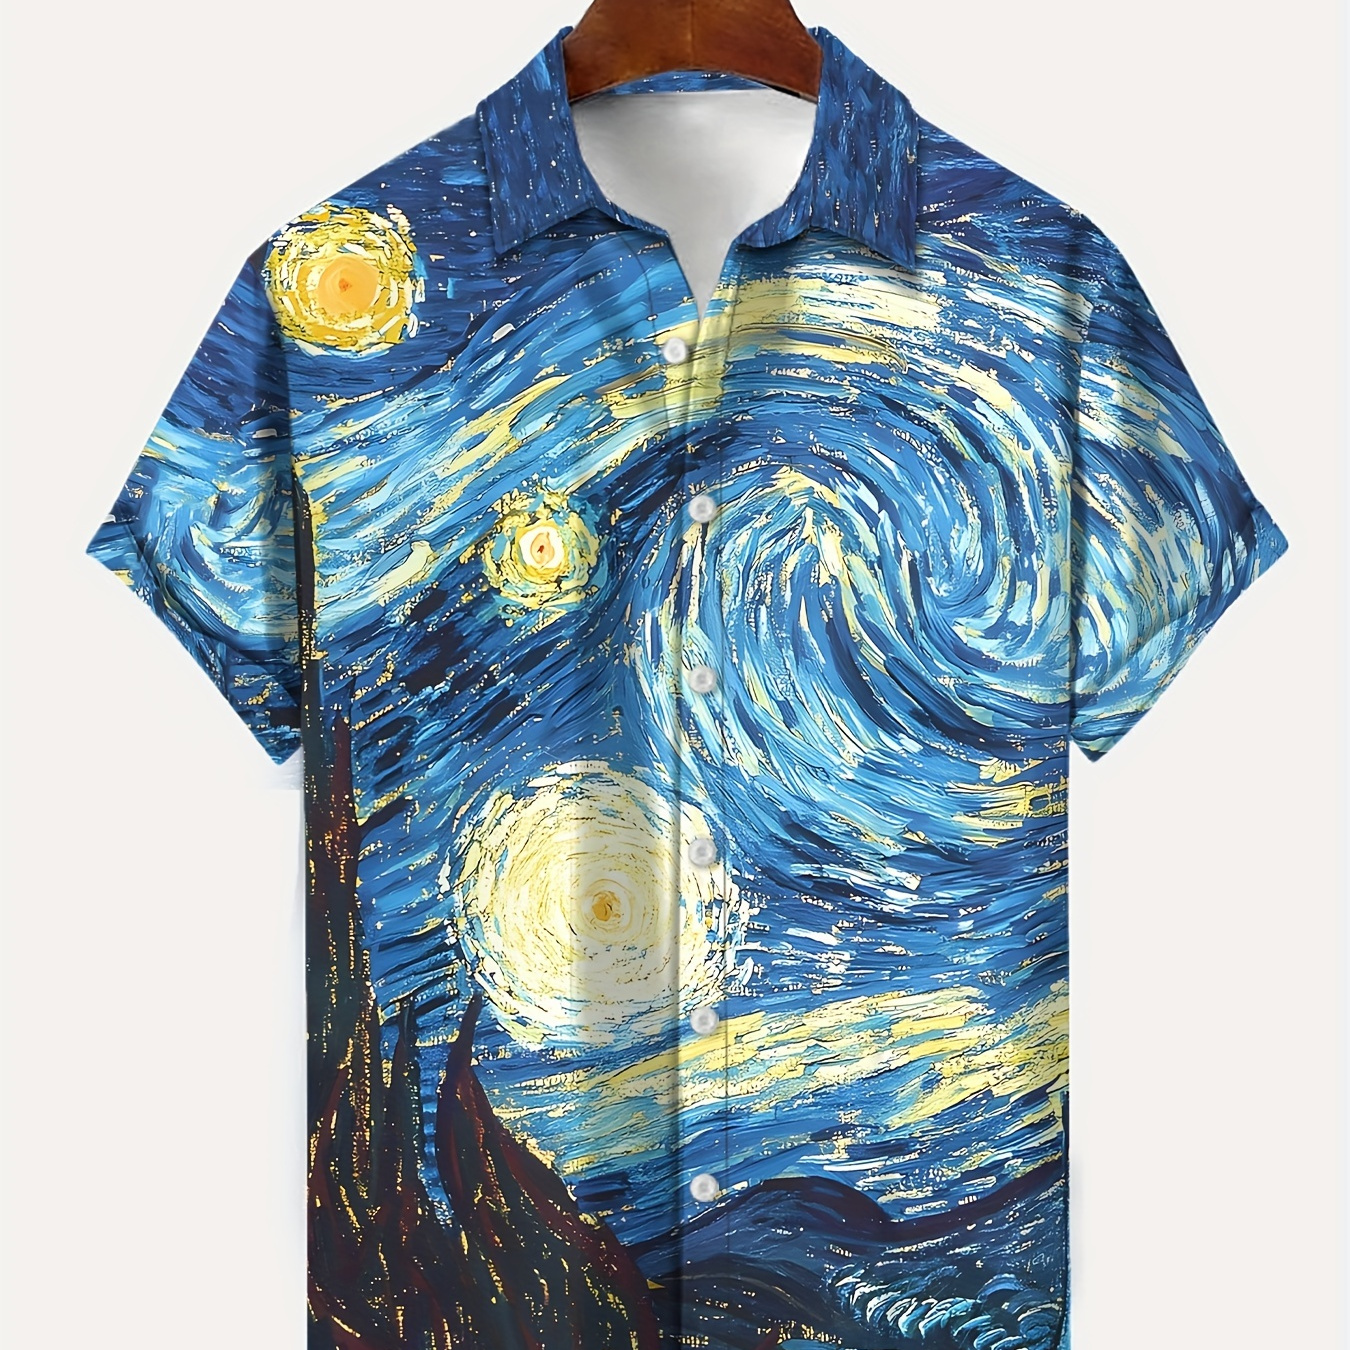 

Men's Starry Sky Graphic Print Shirt, Casual Lapel Button Up Short Sleeve Shirt For Outdoor Activities